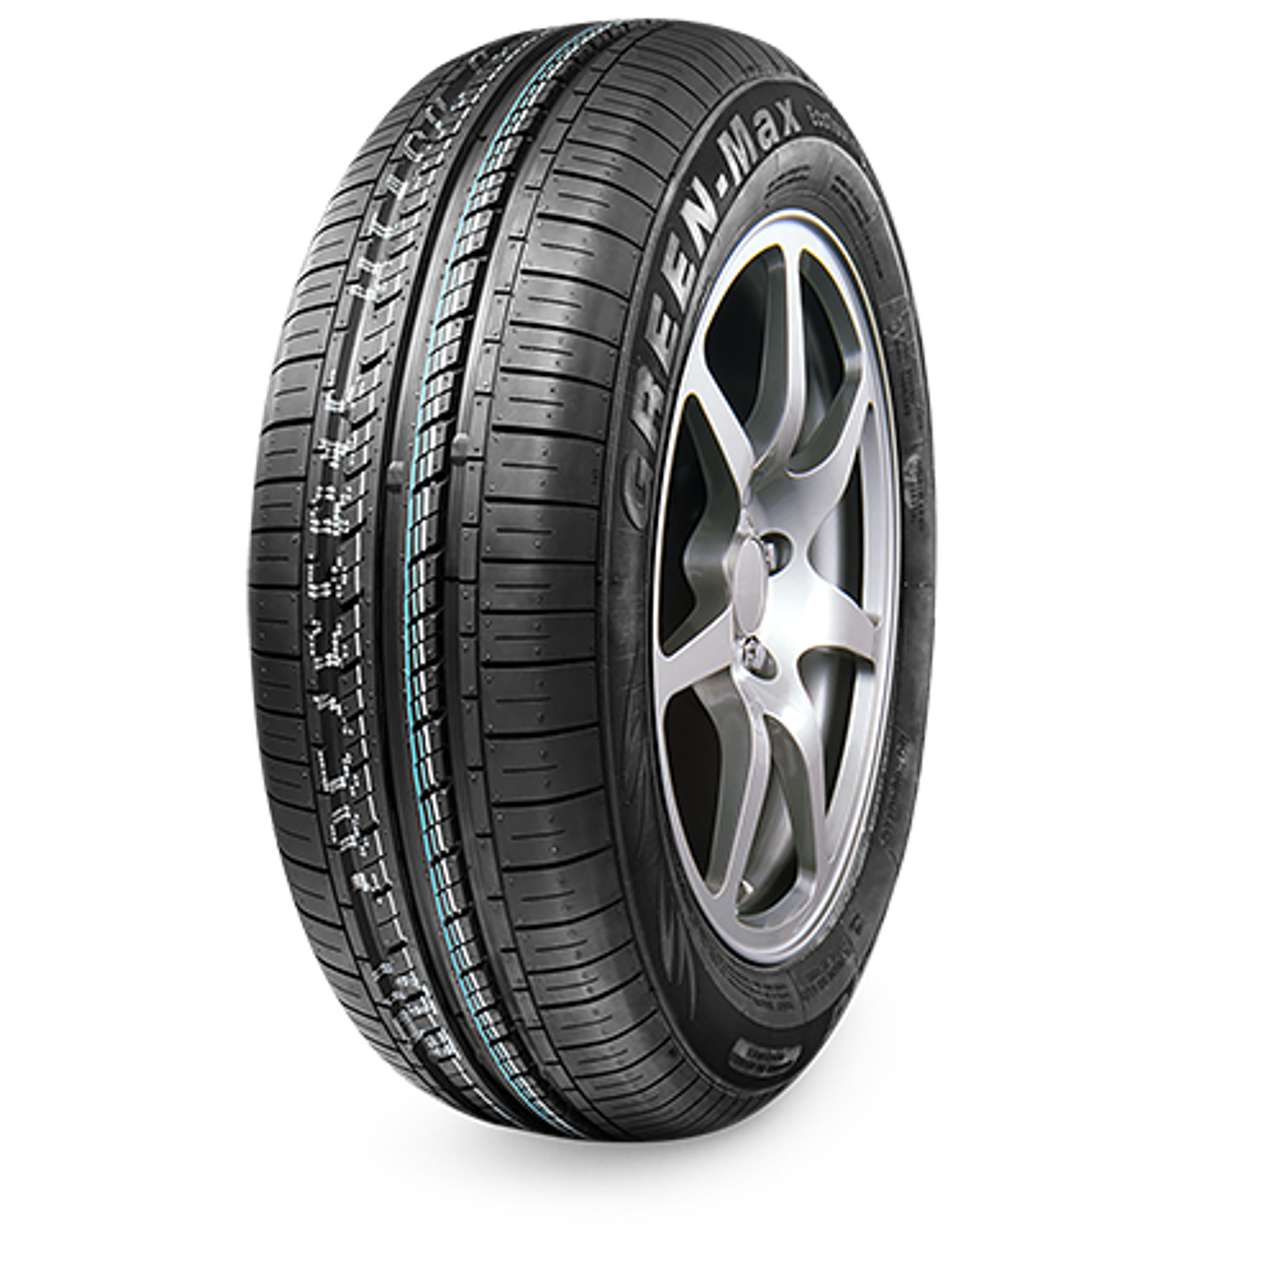 LINGLONG GREEN-MAX ECOTOURING 185/70R14 88T BSW von LINGLONG